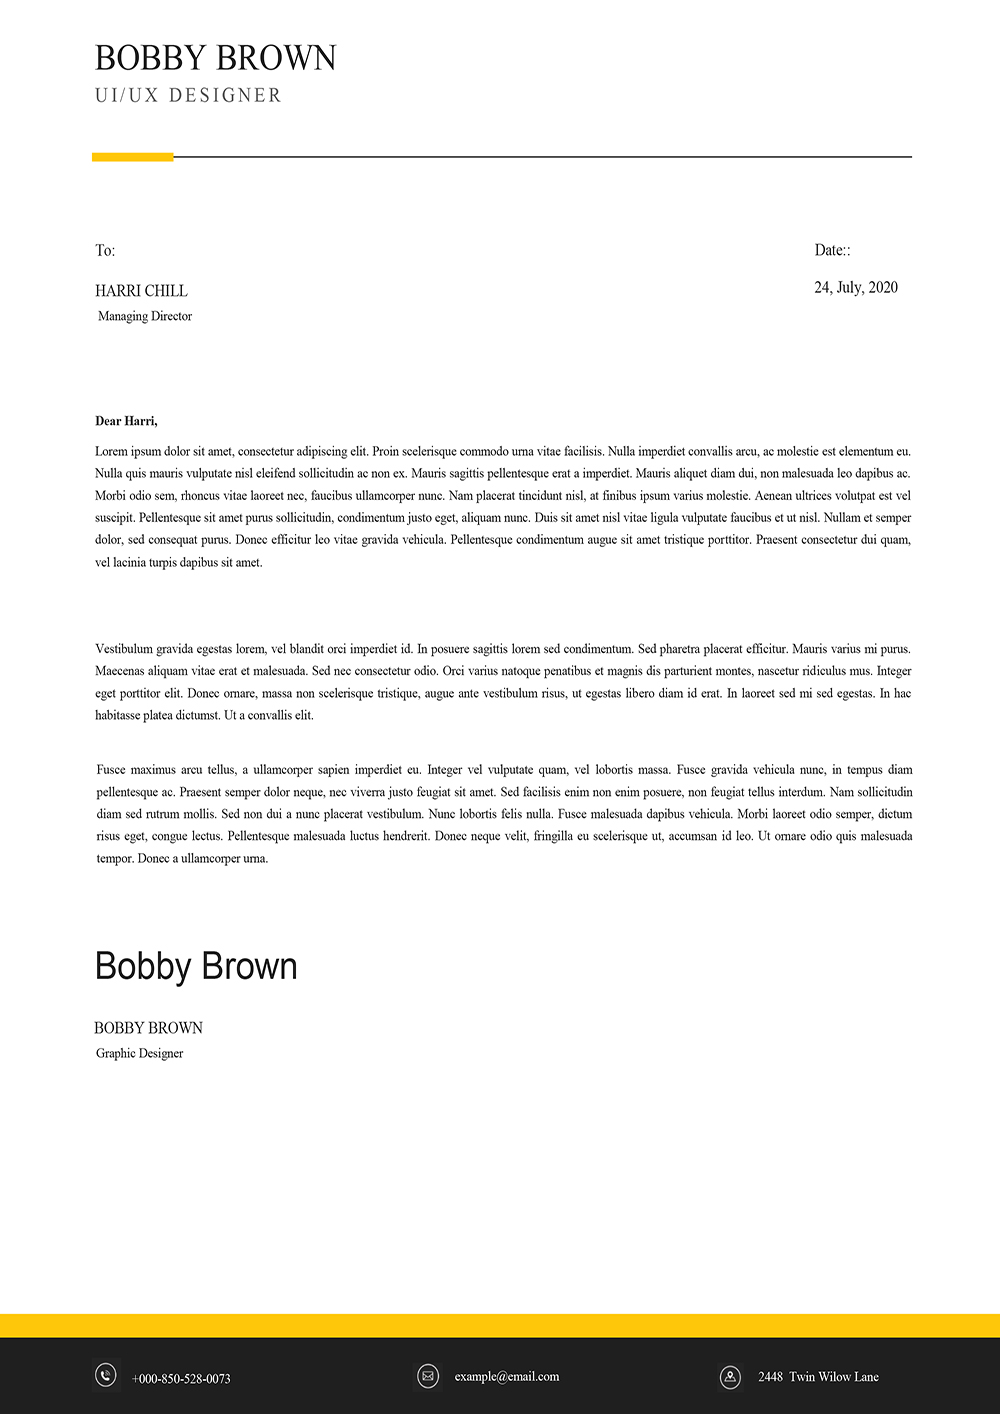 downloadable cover letter templates in word